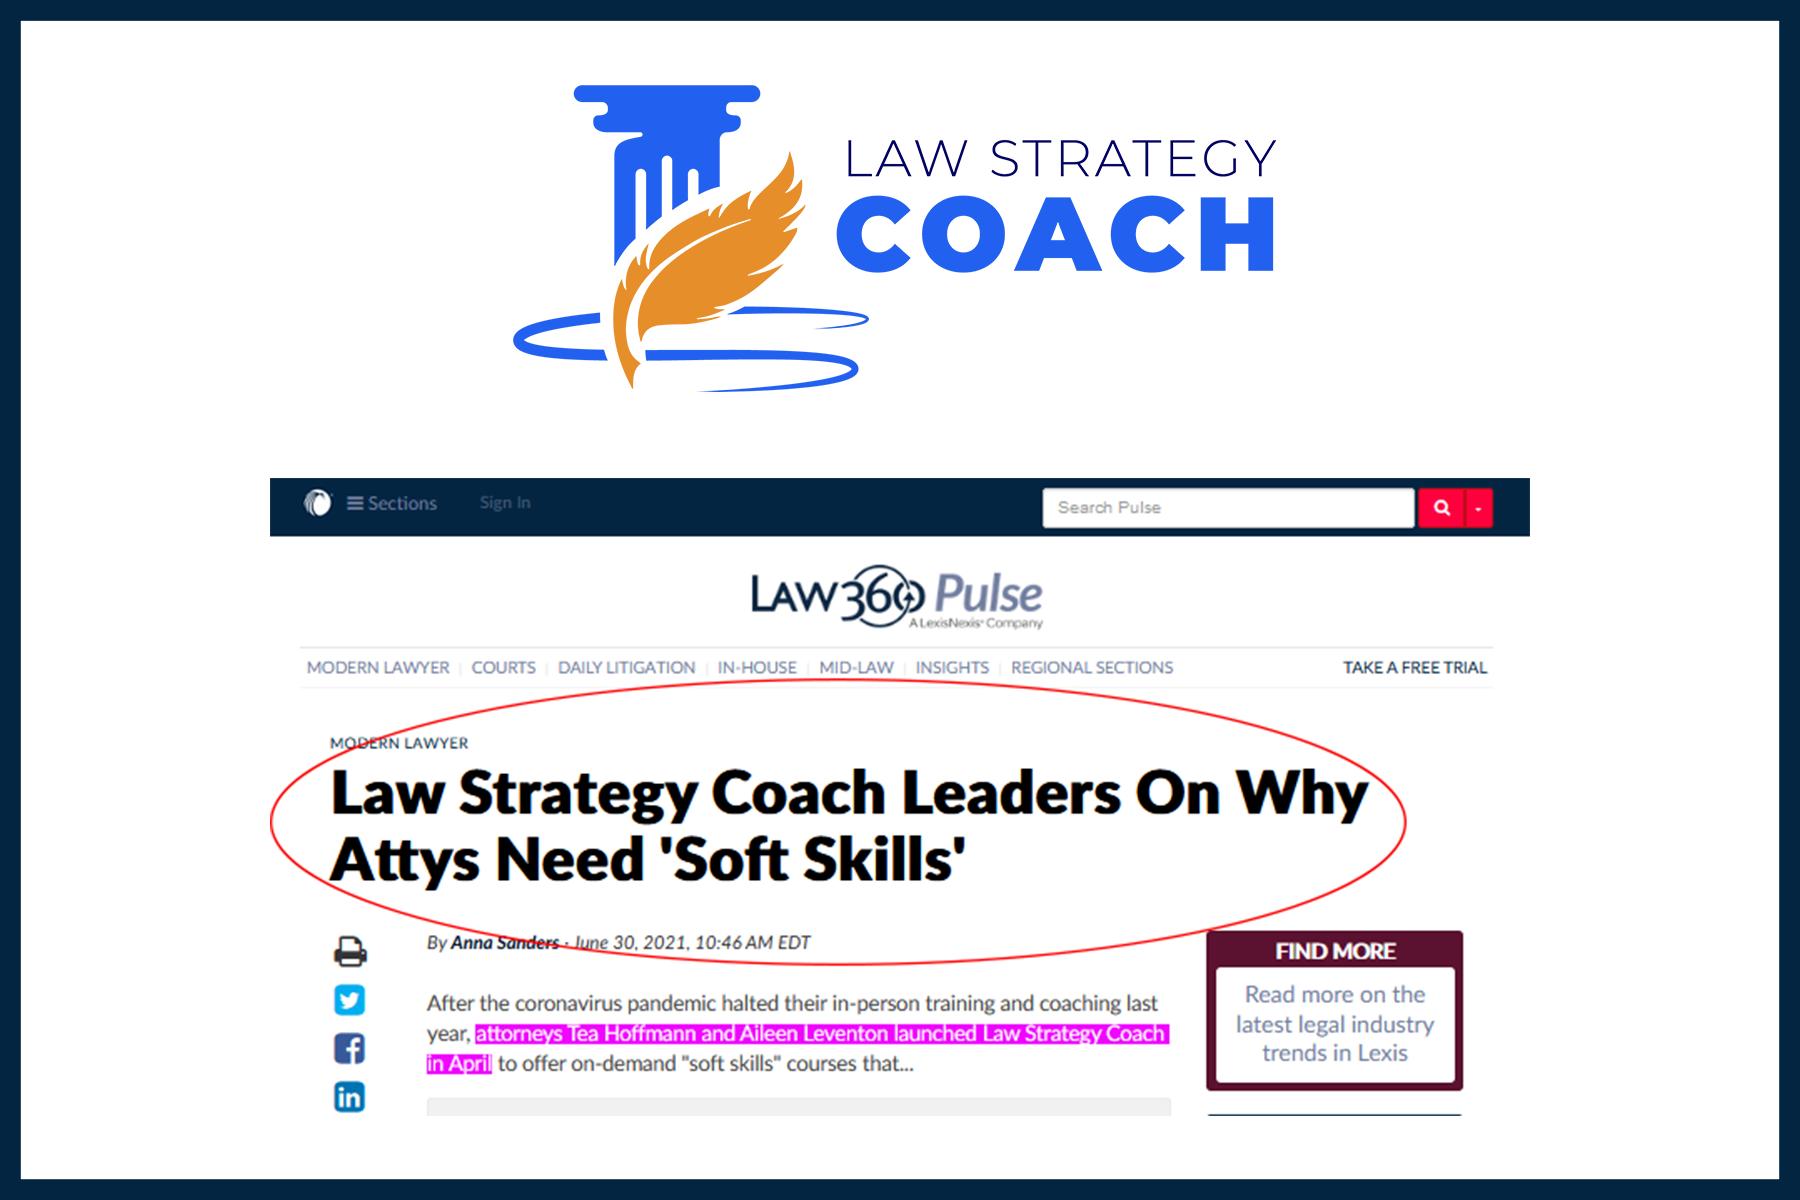 Attorneys Tea Hoffmann and Aileen Leventon launched Law Strategy Coach in April to offer on-demand "soft skills" courses.